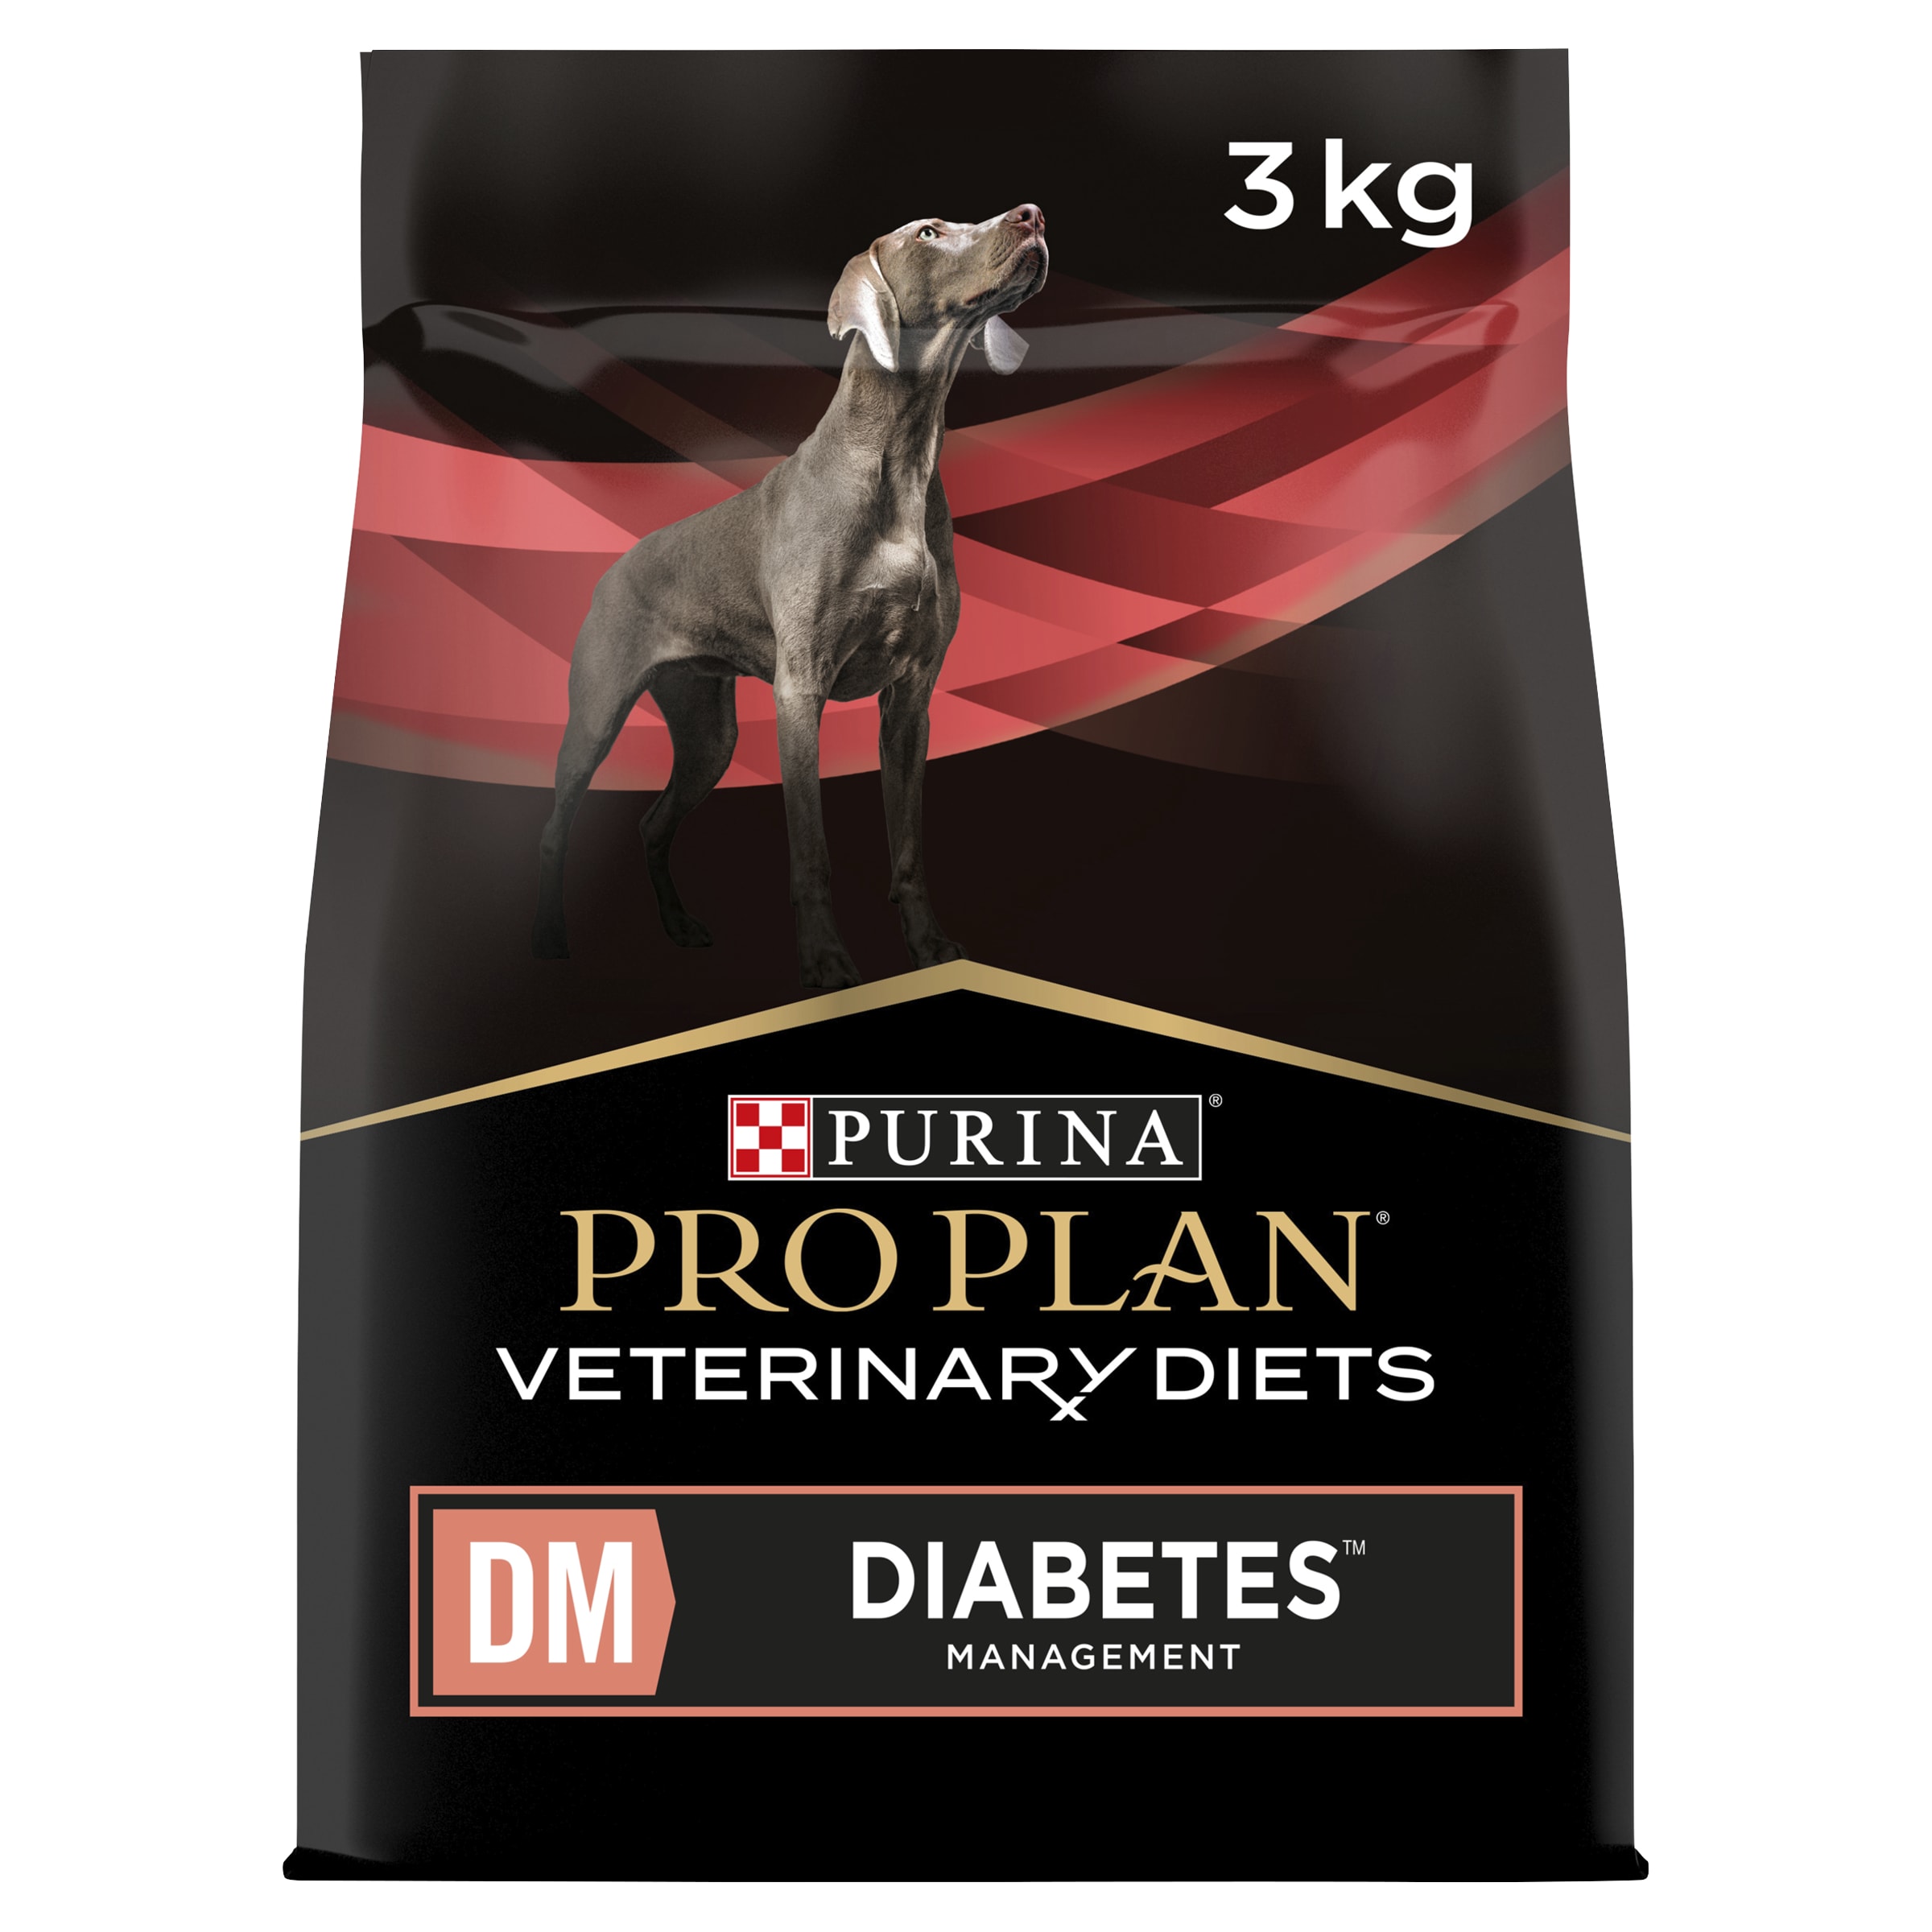 PURINA PROPLAN VETERINARY DIETS Canine DM